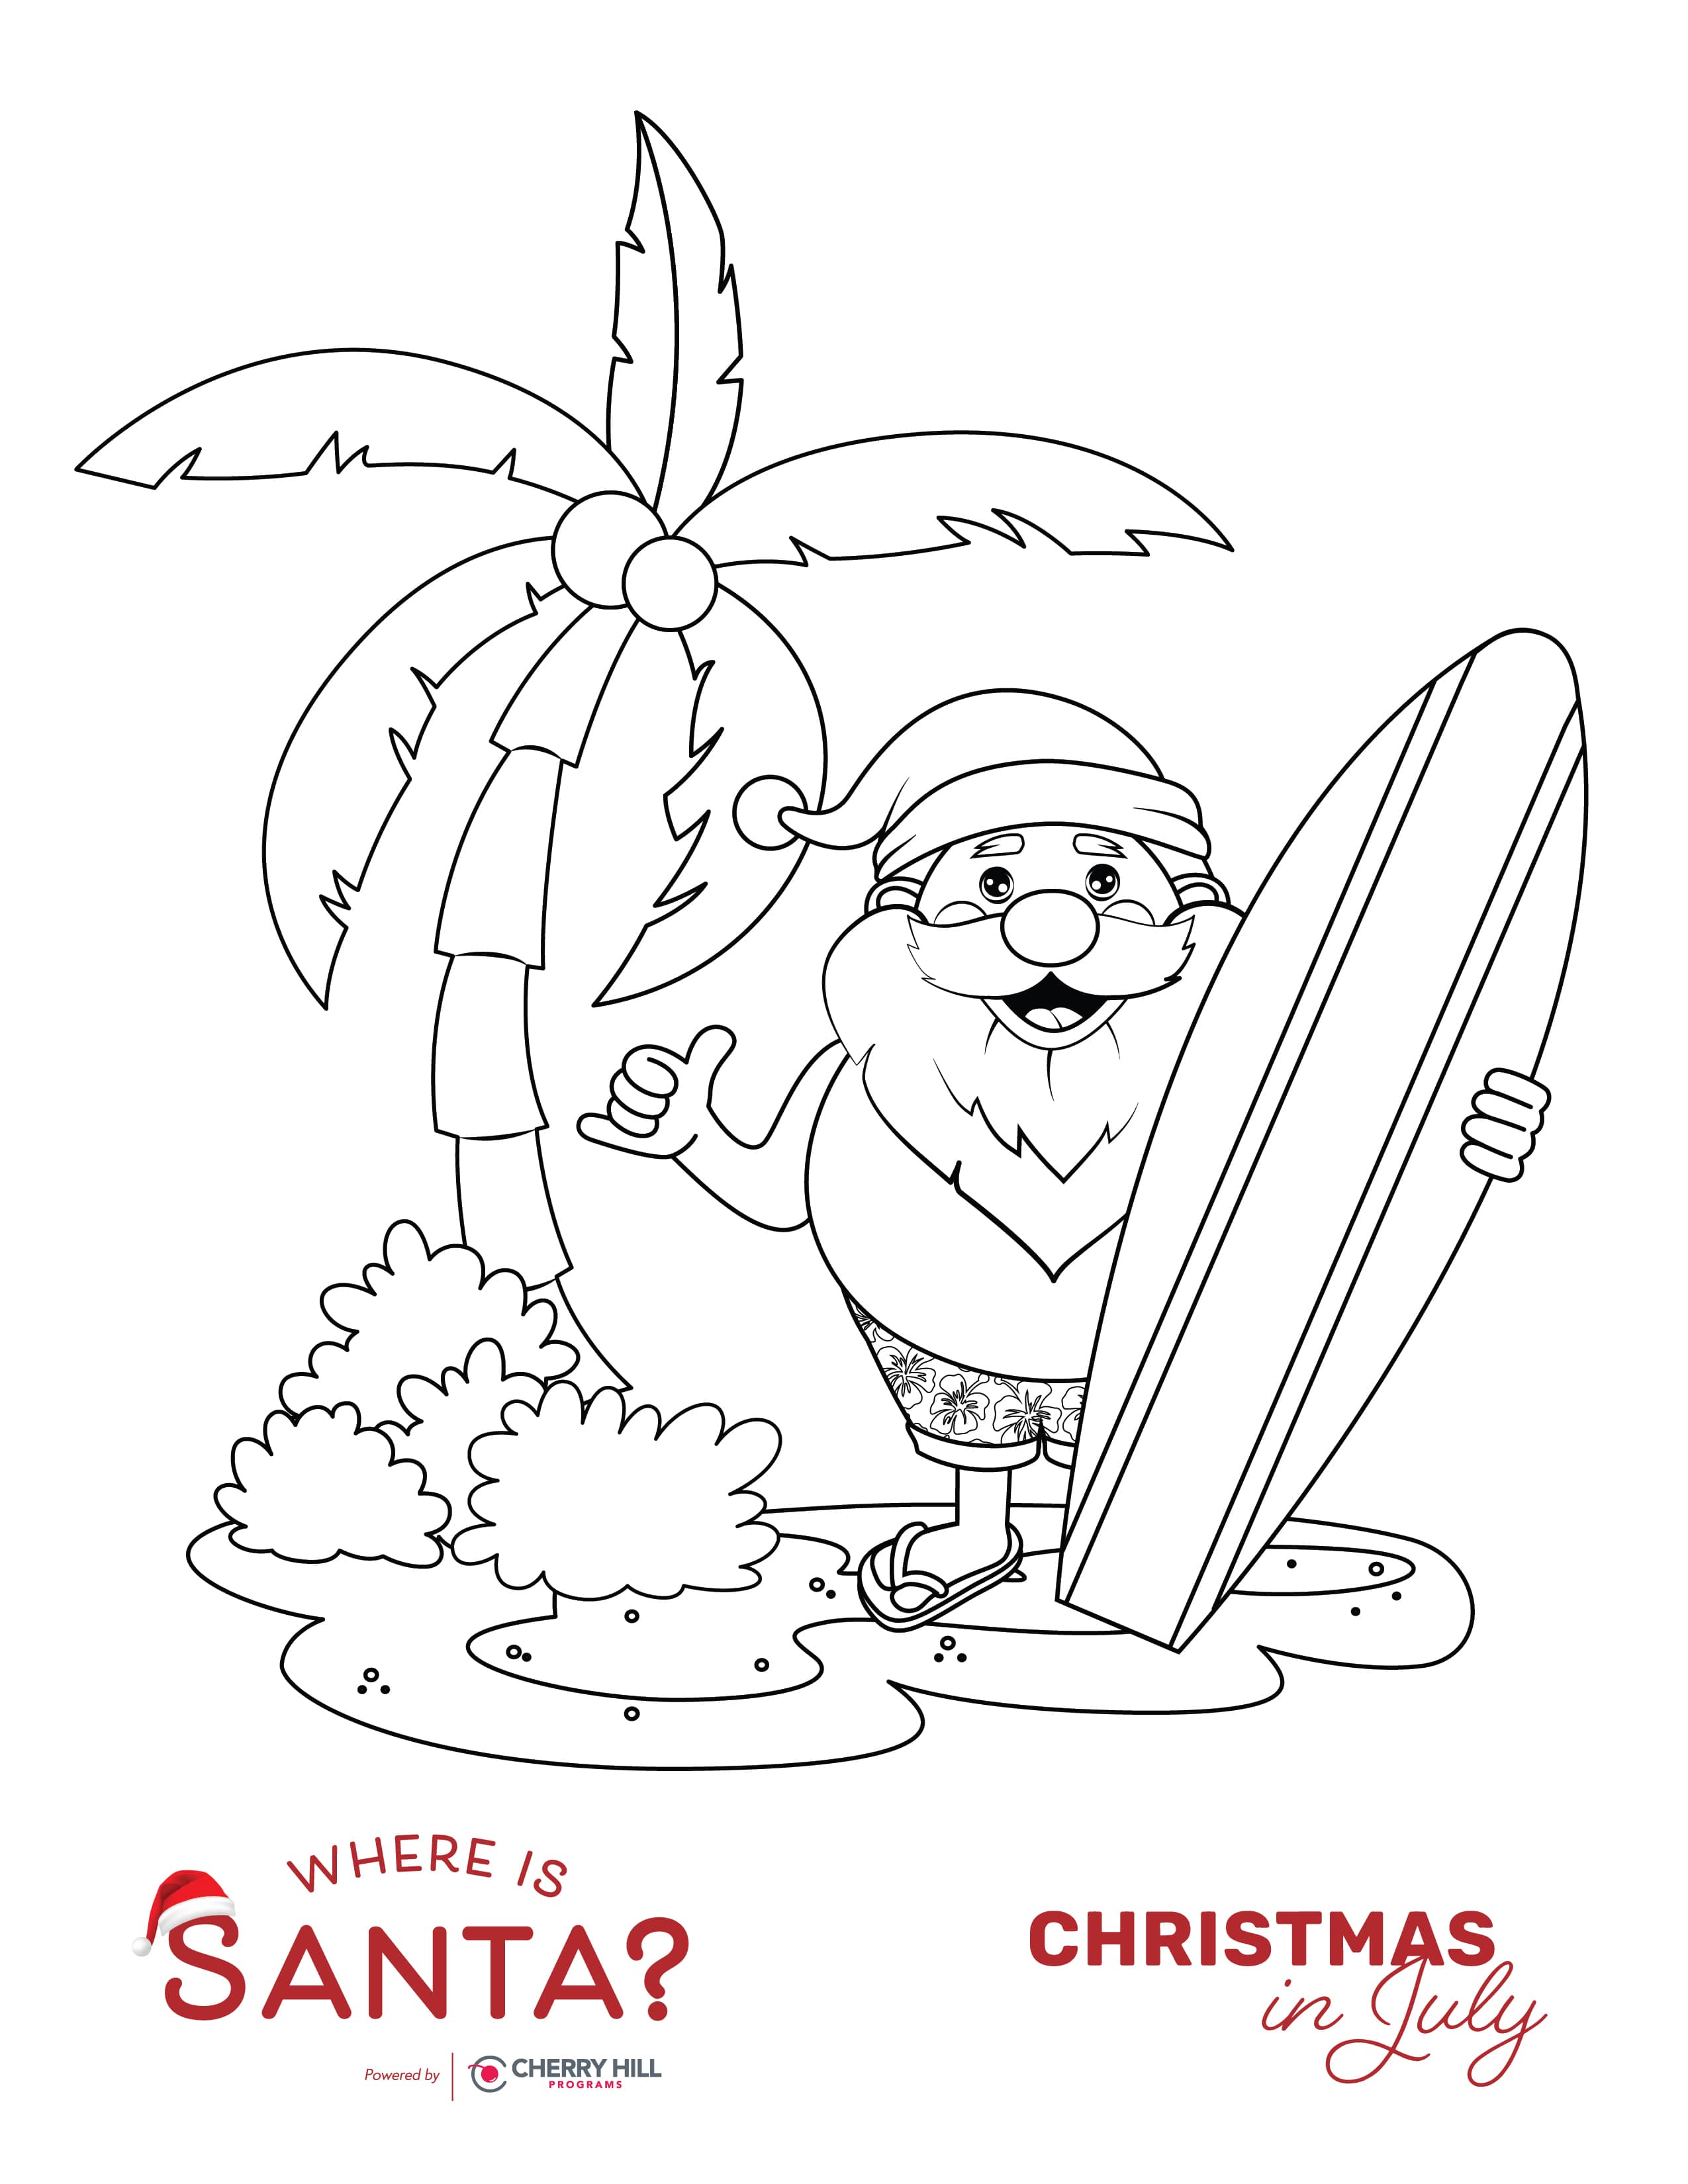 Christmas in July_Coloring Sheets-01